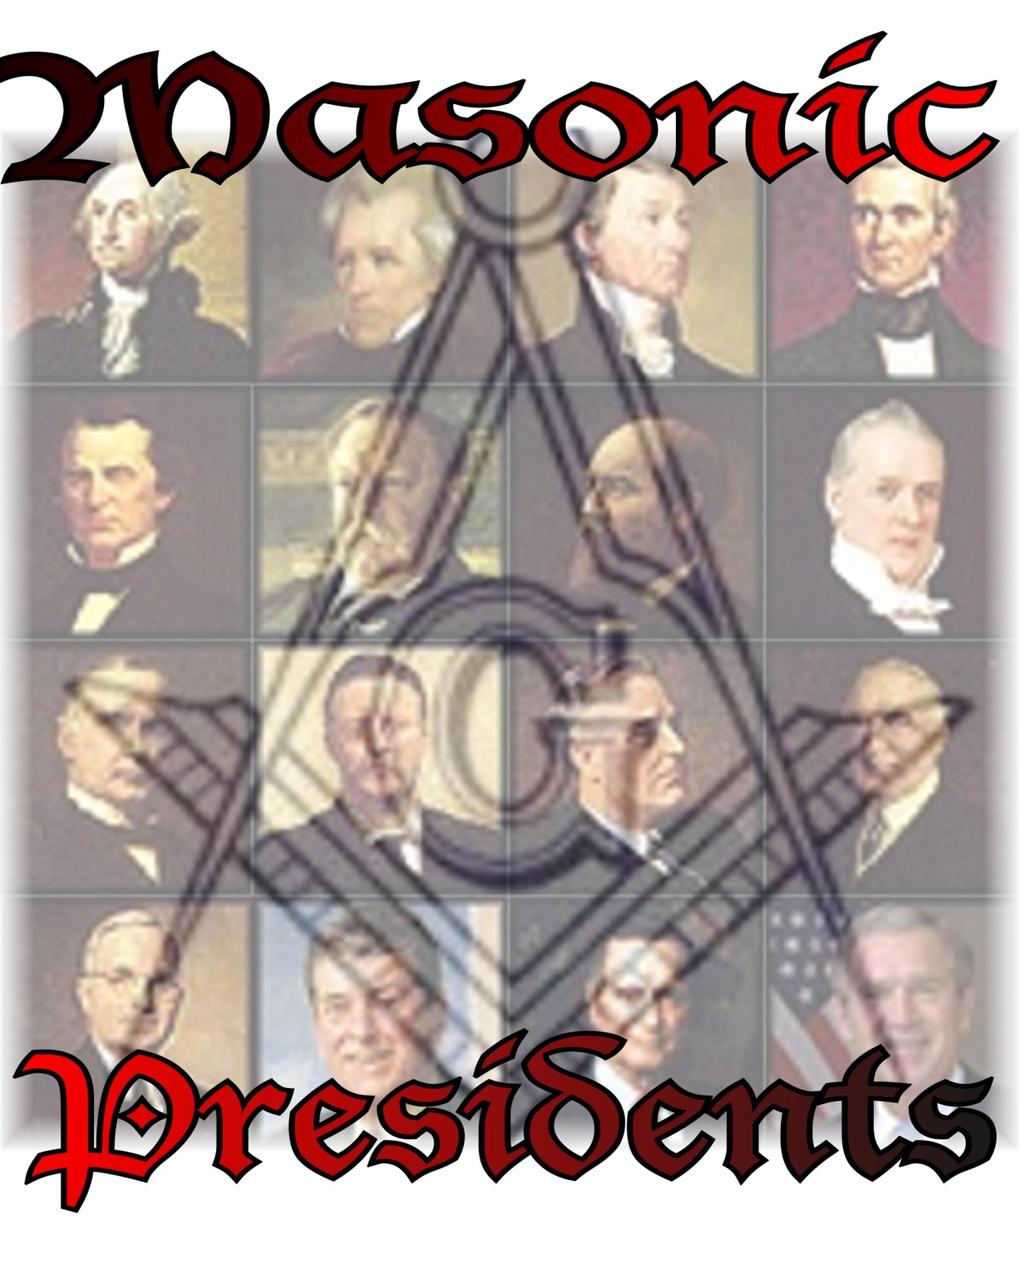 ) George Bush (?) (?) George W. Bush (?) The membership of Freemasonry, by and large, is made up of average men.